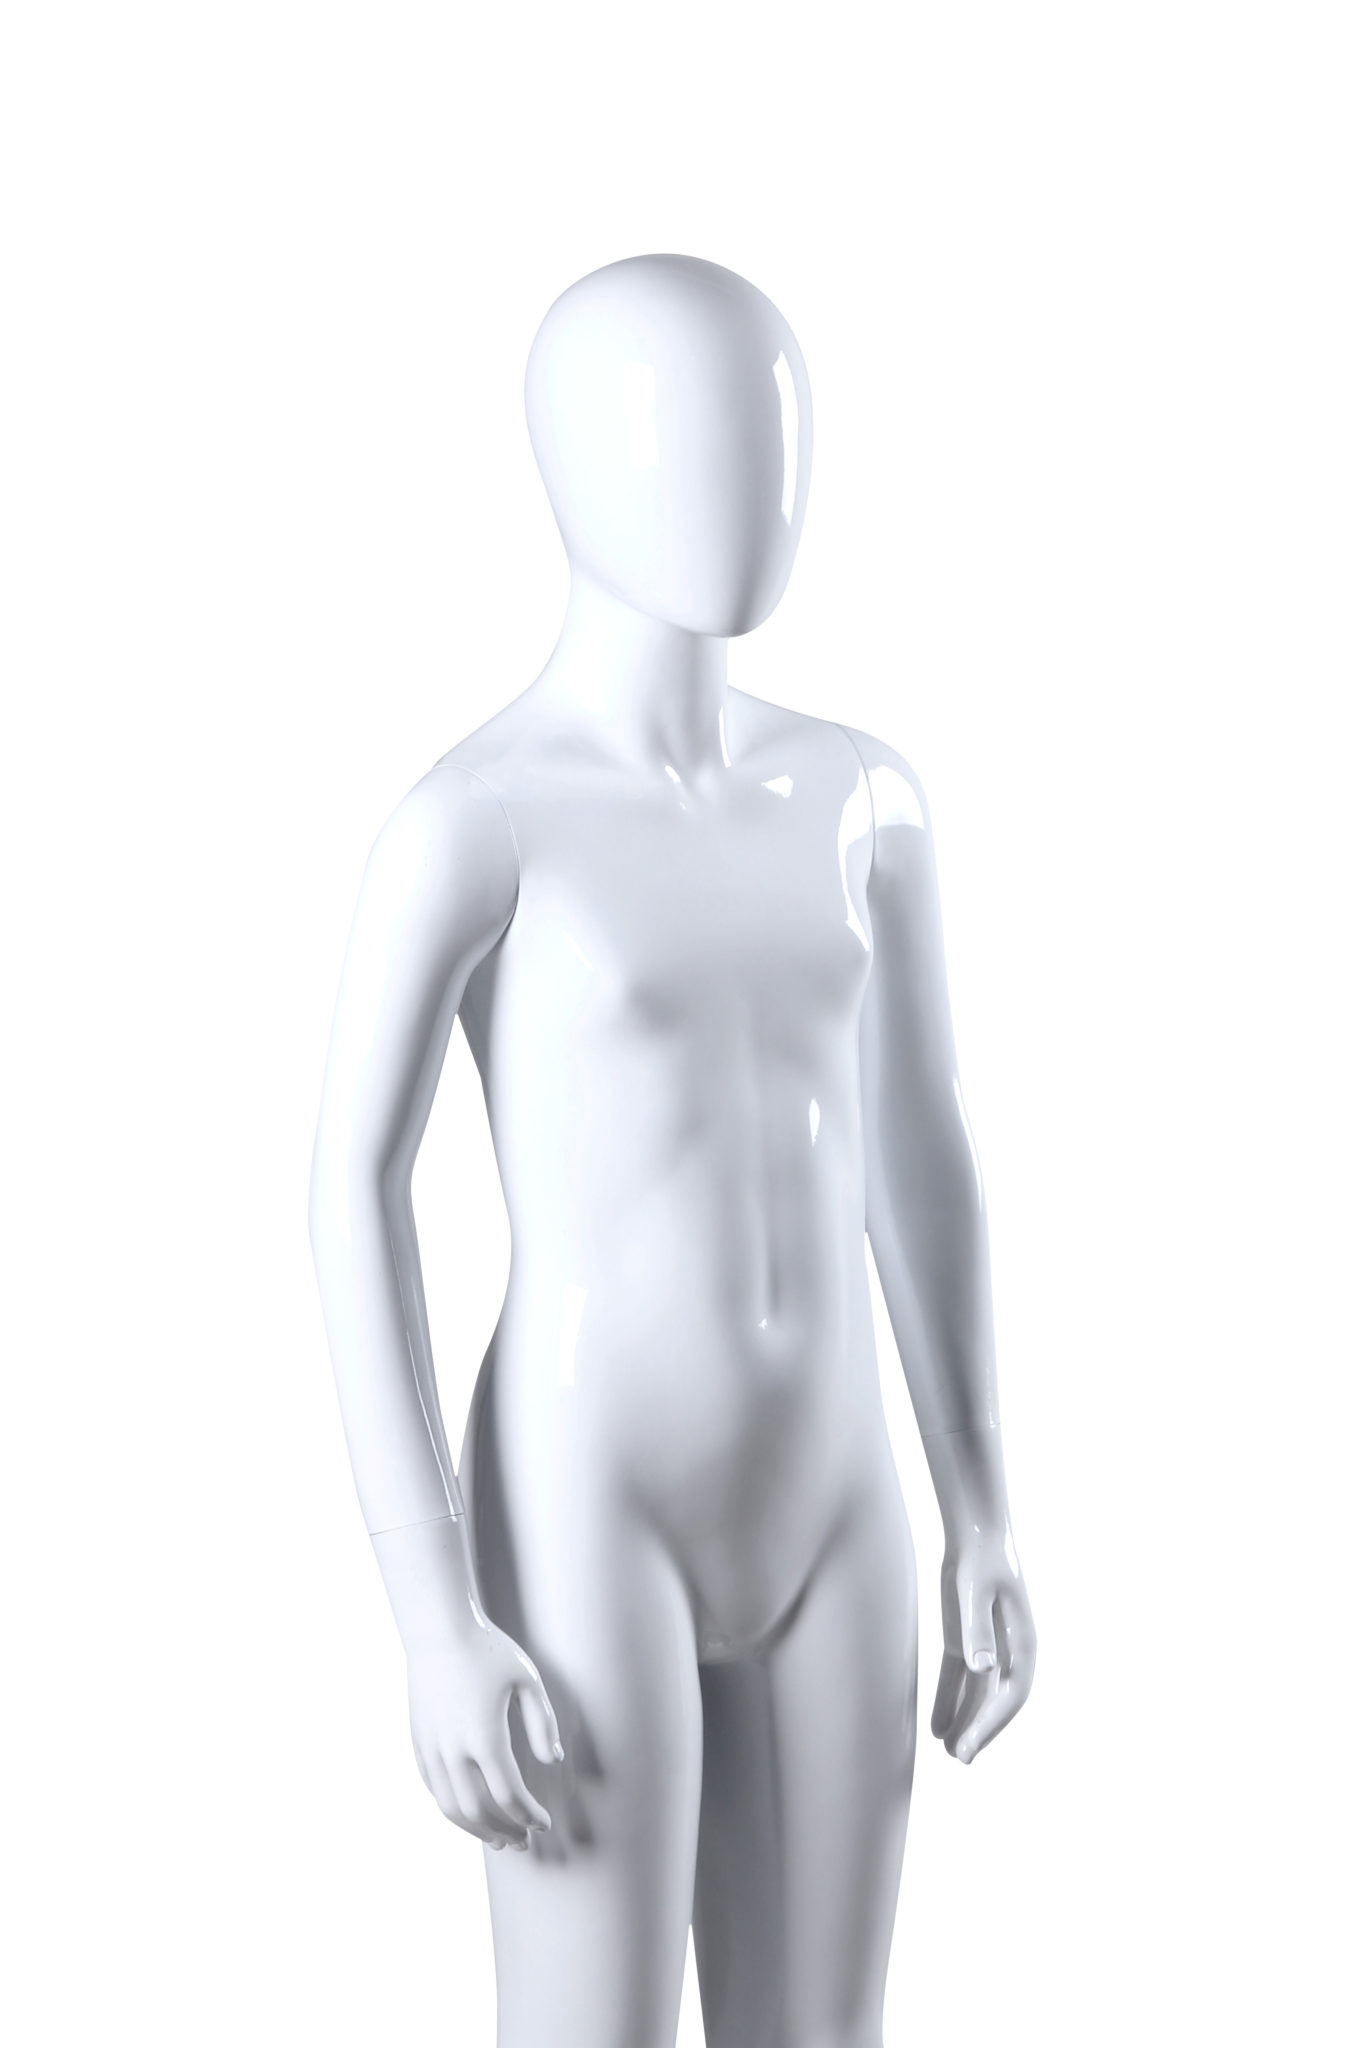 Glossy White Abstract Child Mannequin